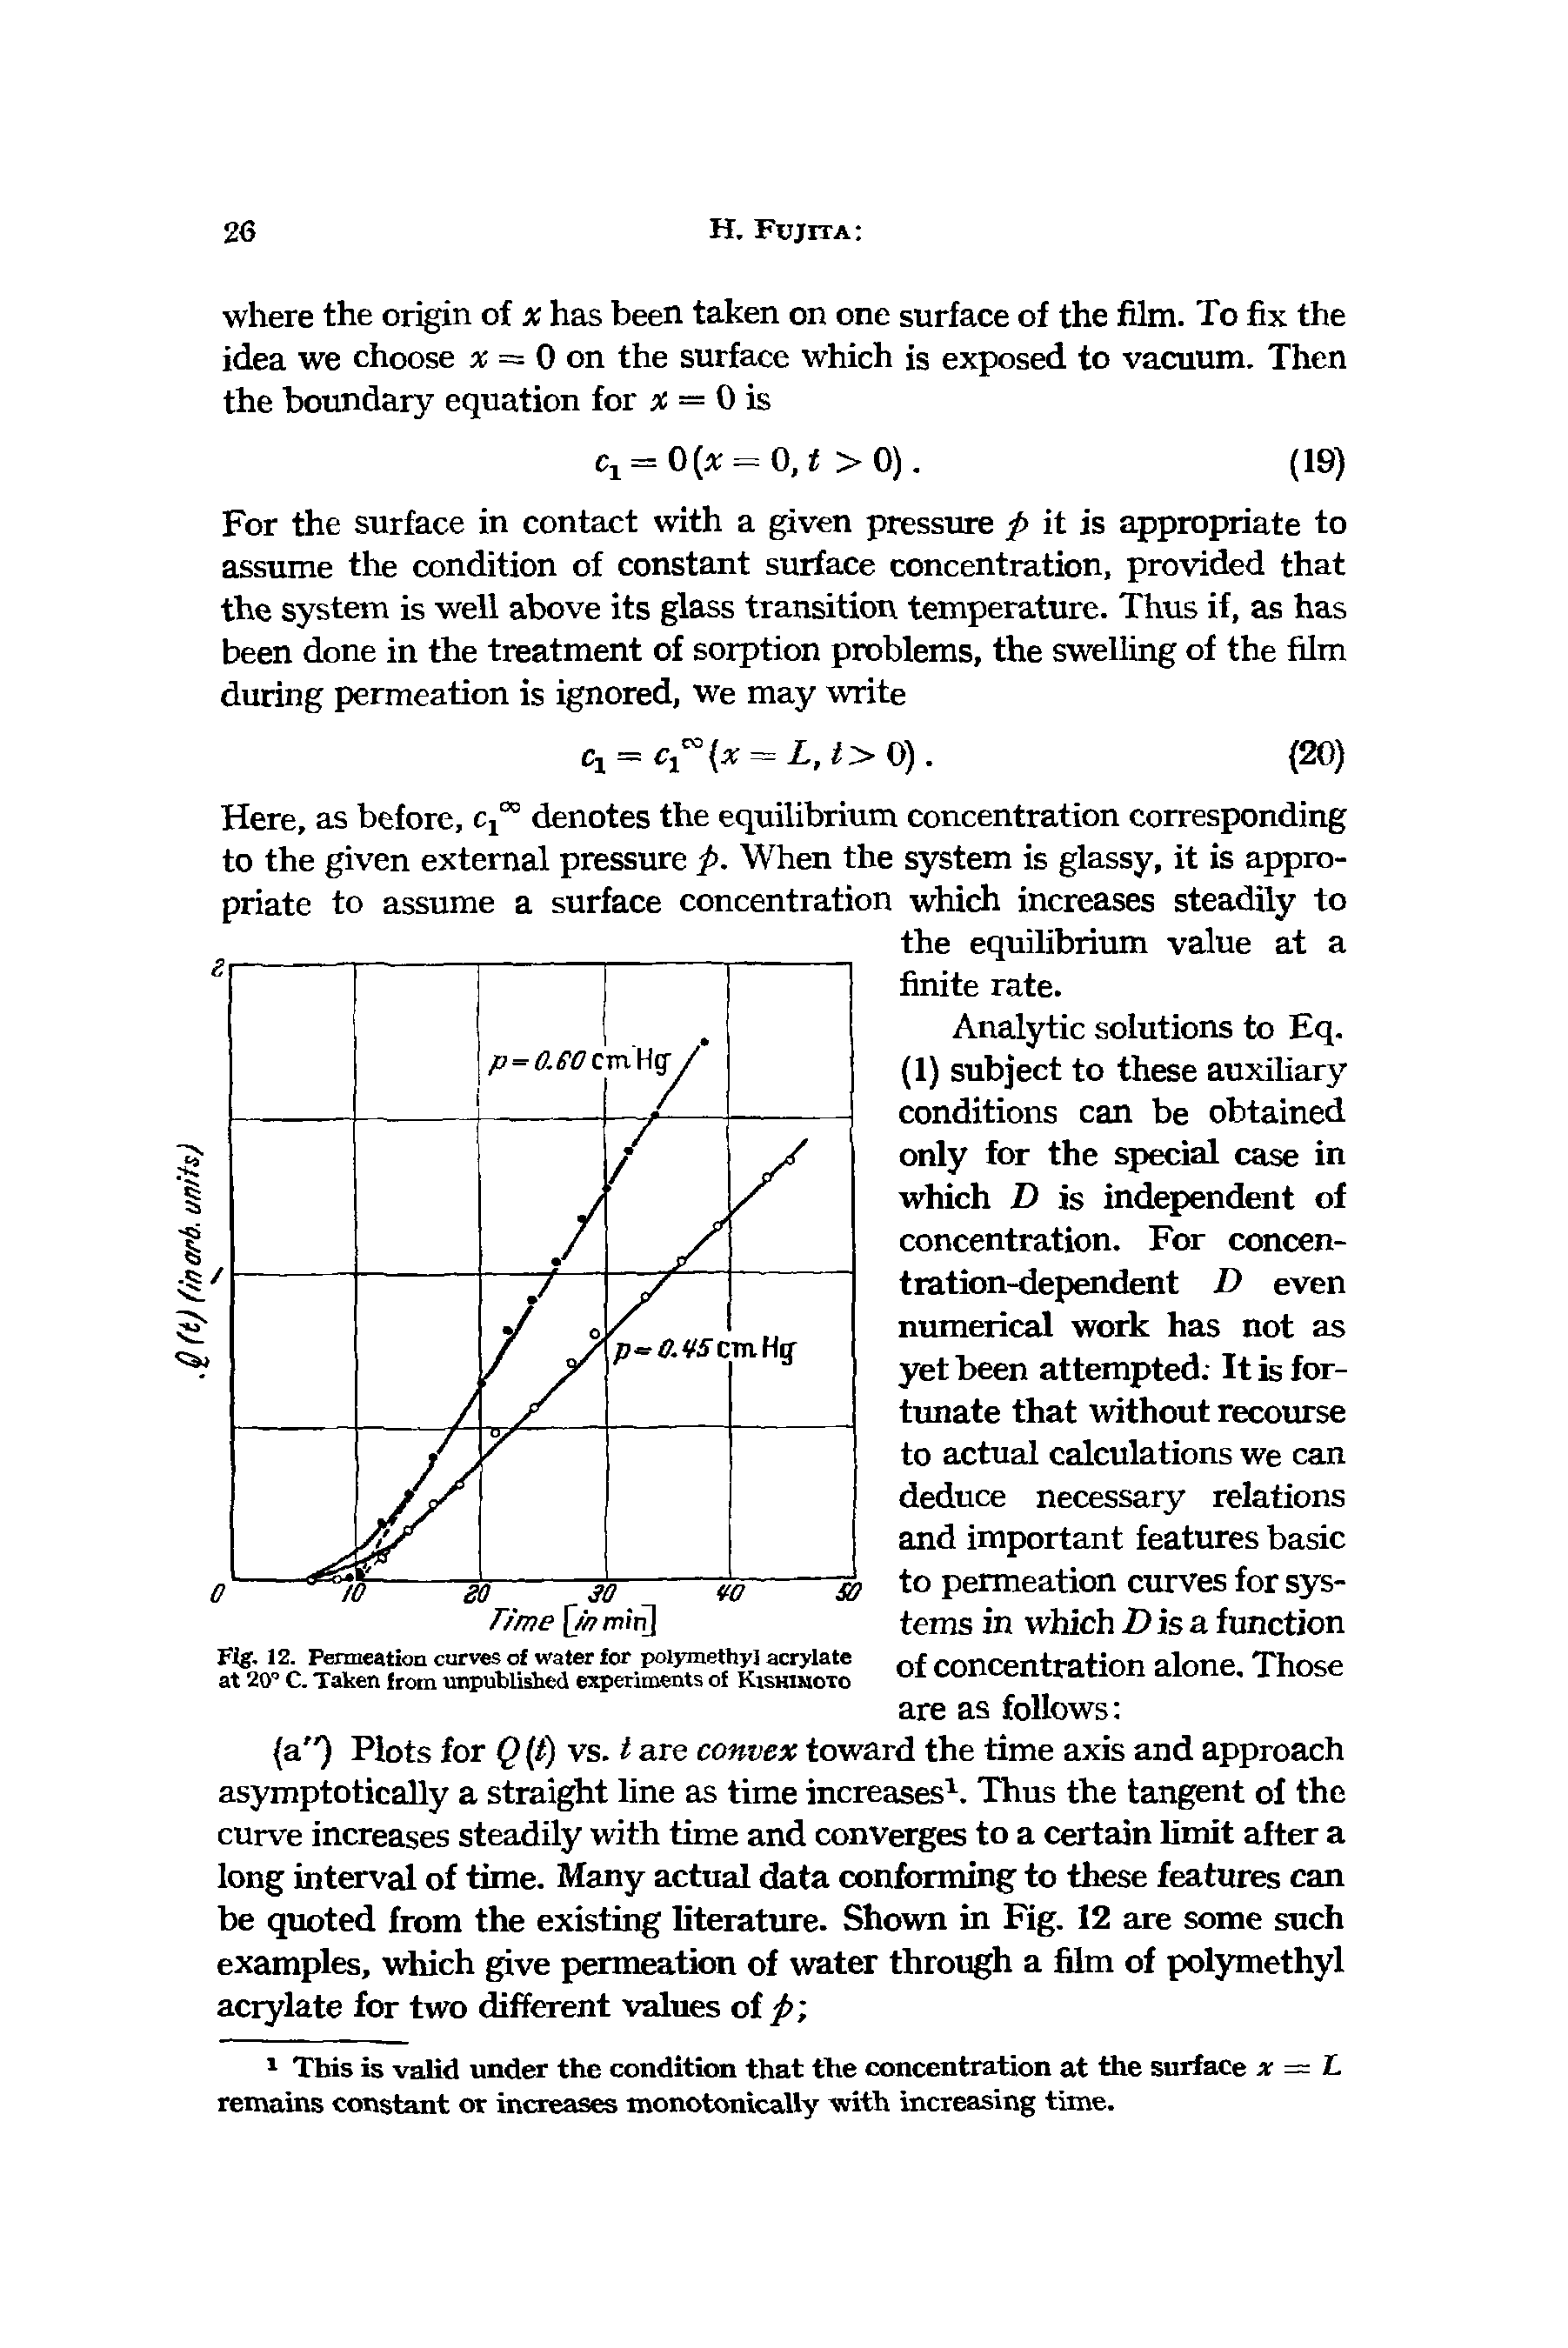 Fig. 12. Permeation curves of water for polymethyl acrylate at 20° C. Taken from unpublished experiments of Kishimoto...